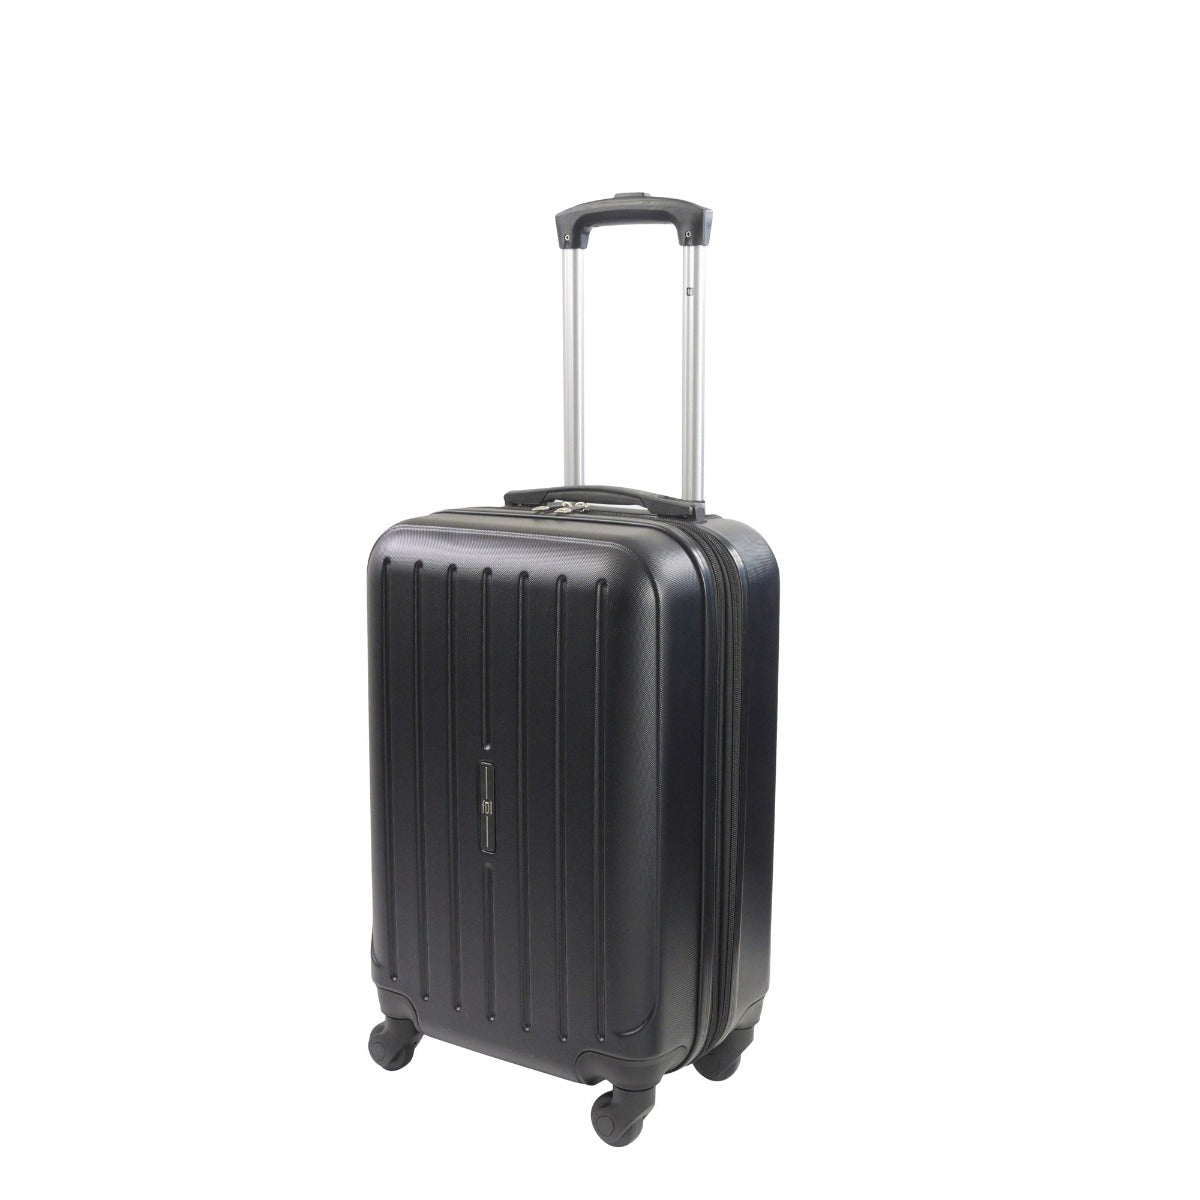 Pure 21-inch scratch resistant carry-on spinner suitcase affordable luggage in black